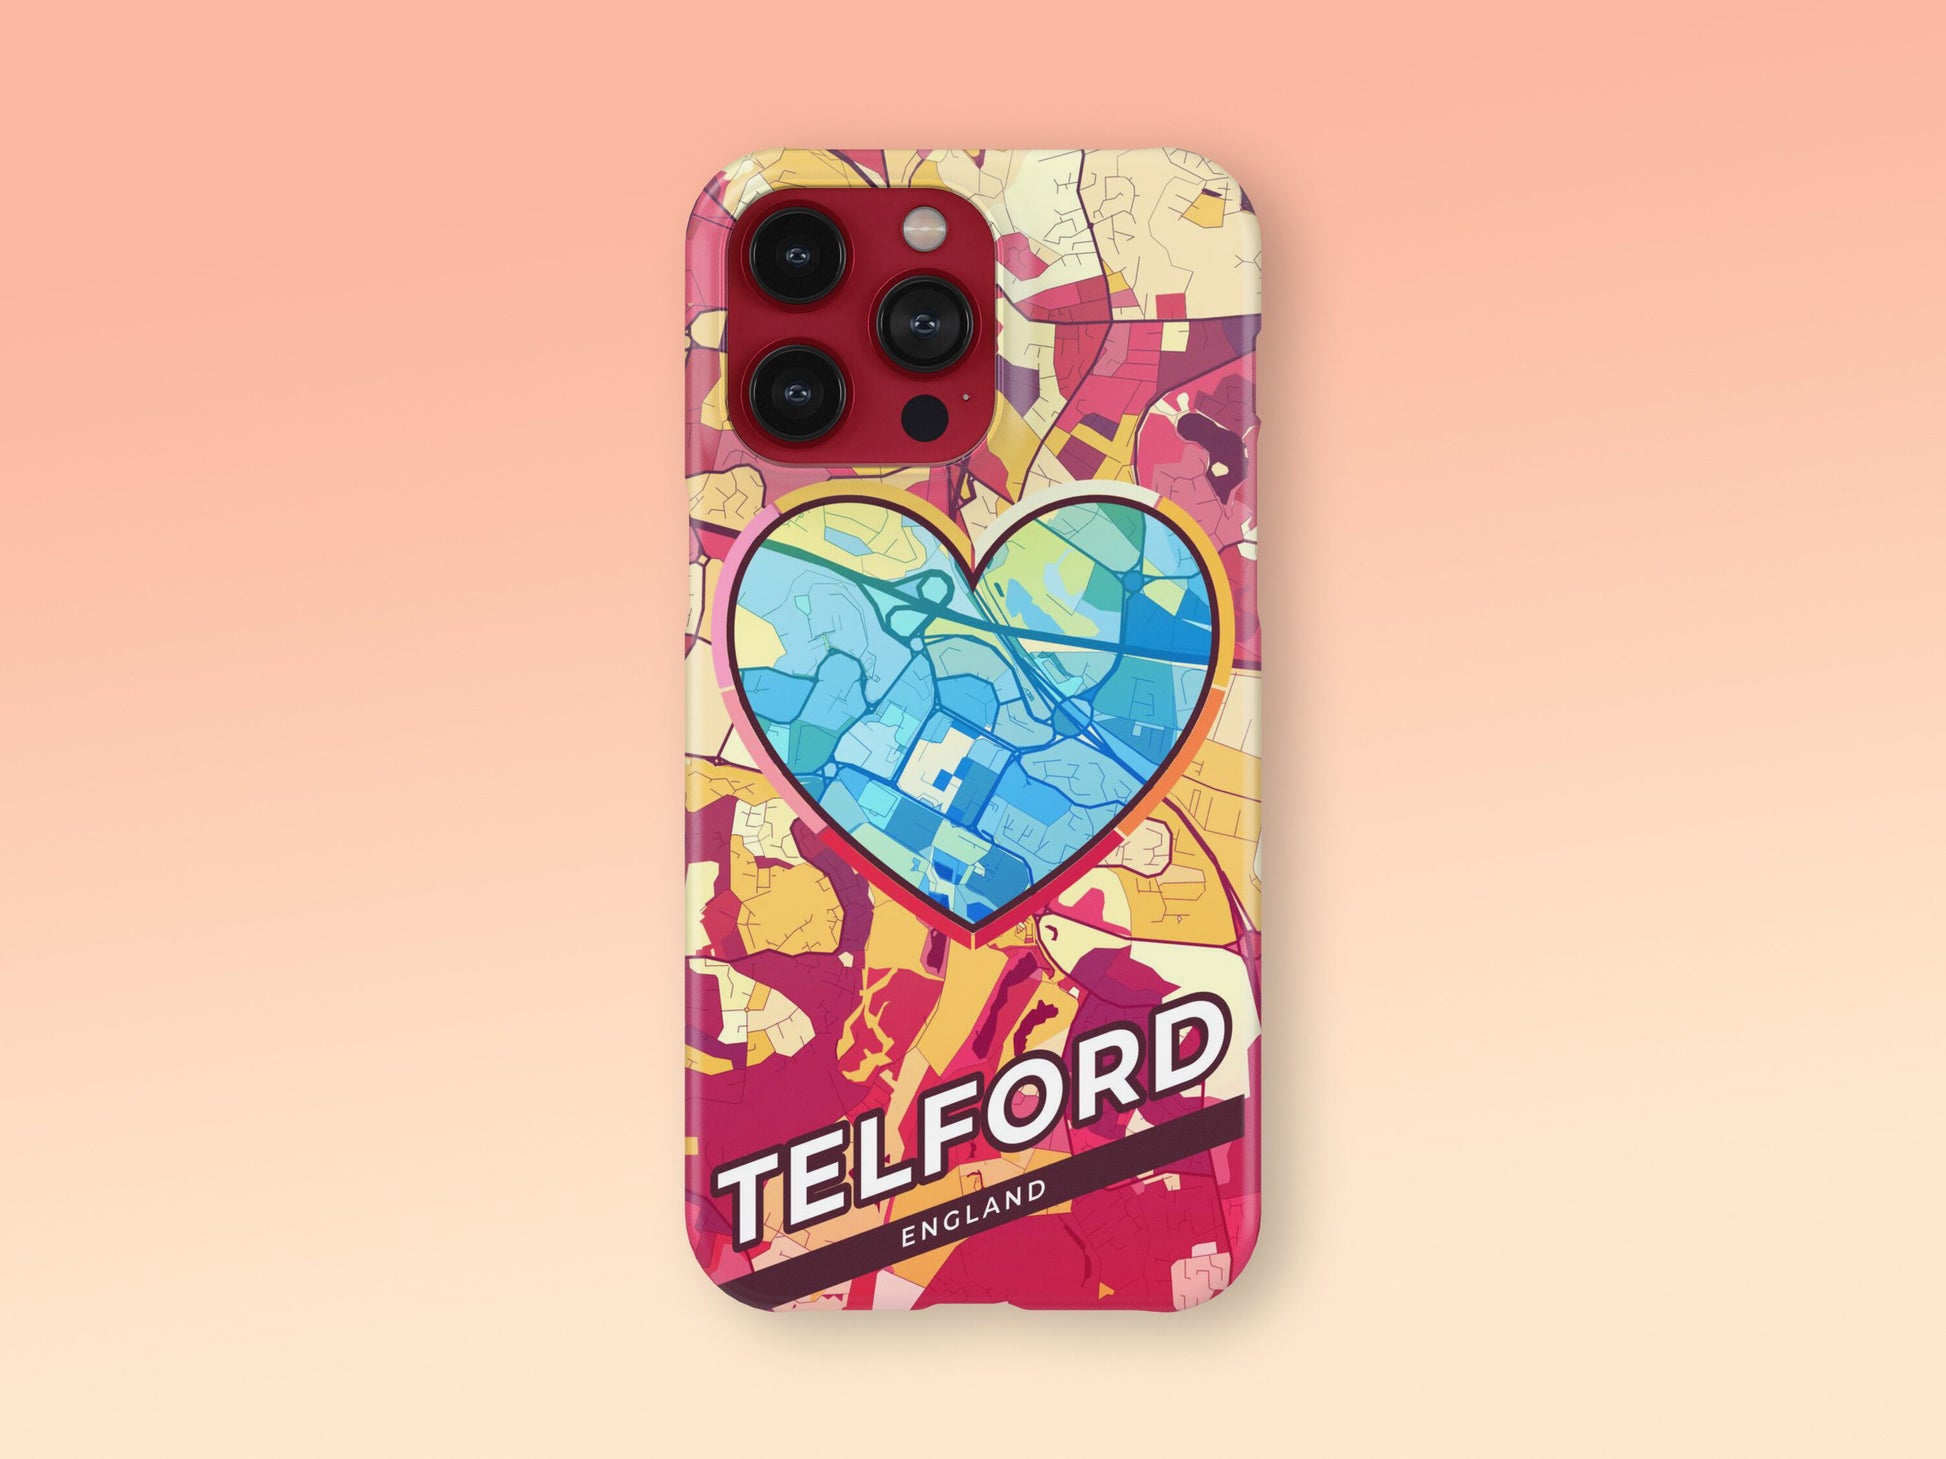 Telford England slim phone case with colorful icon 2